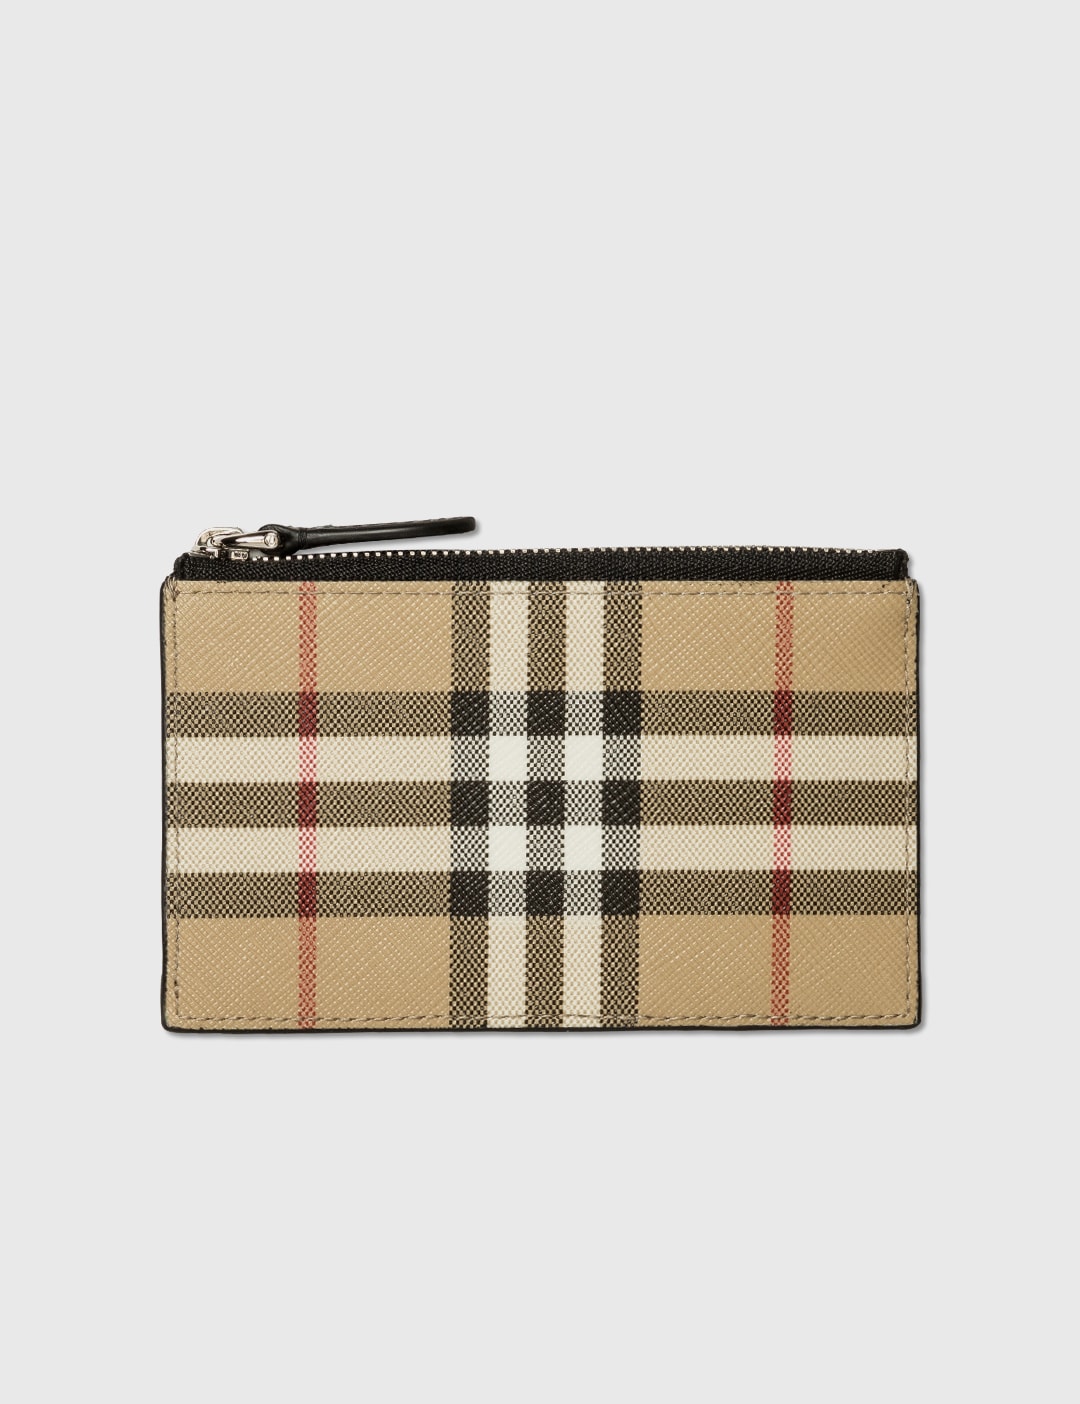 Burberry Men's Vintage Check and Leather Card Case